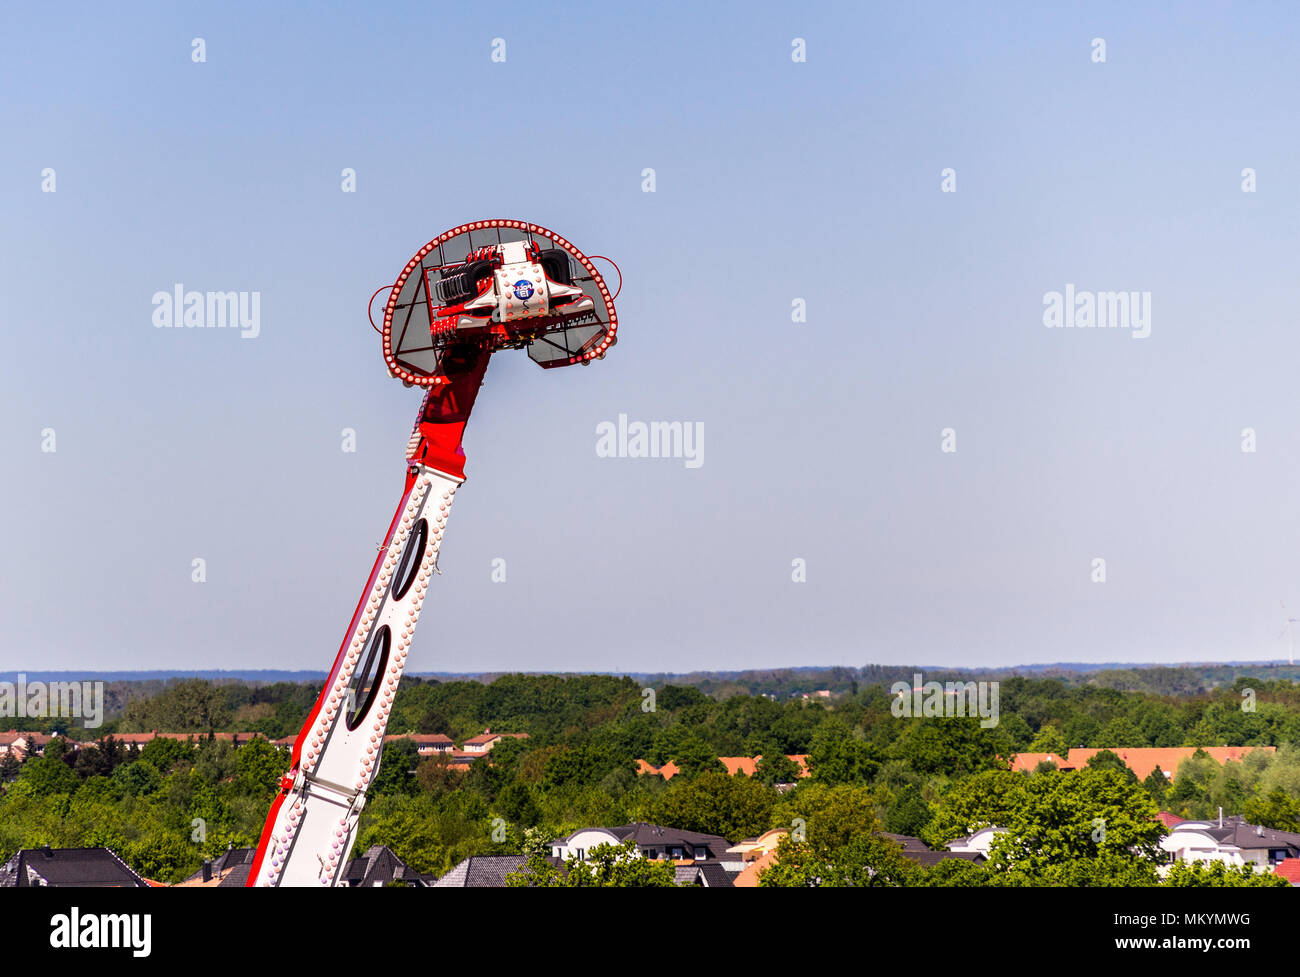 Wolfsburg, Lower Saxony, May 5, 2018: Huge ride called 'Apollo 13' at a funfair shortly before its turning point at a height of 55 meters, with the ou Stock Photo